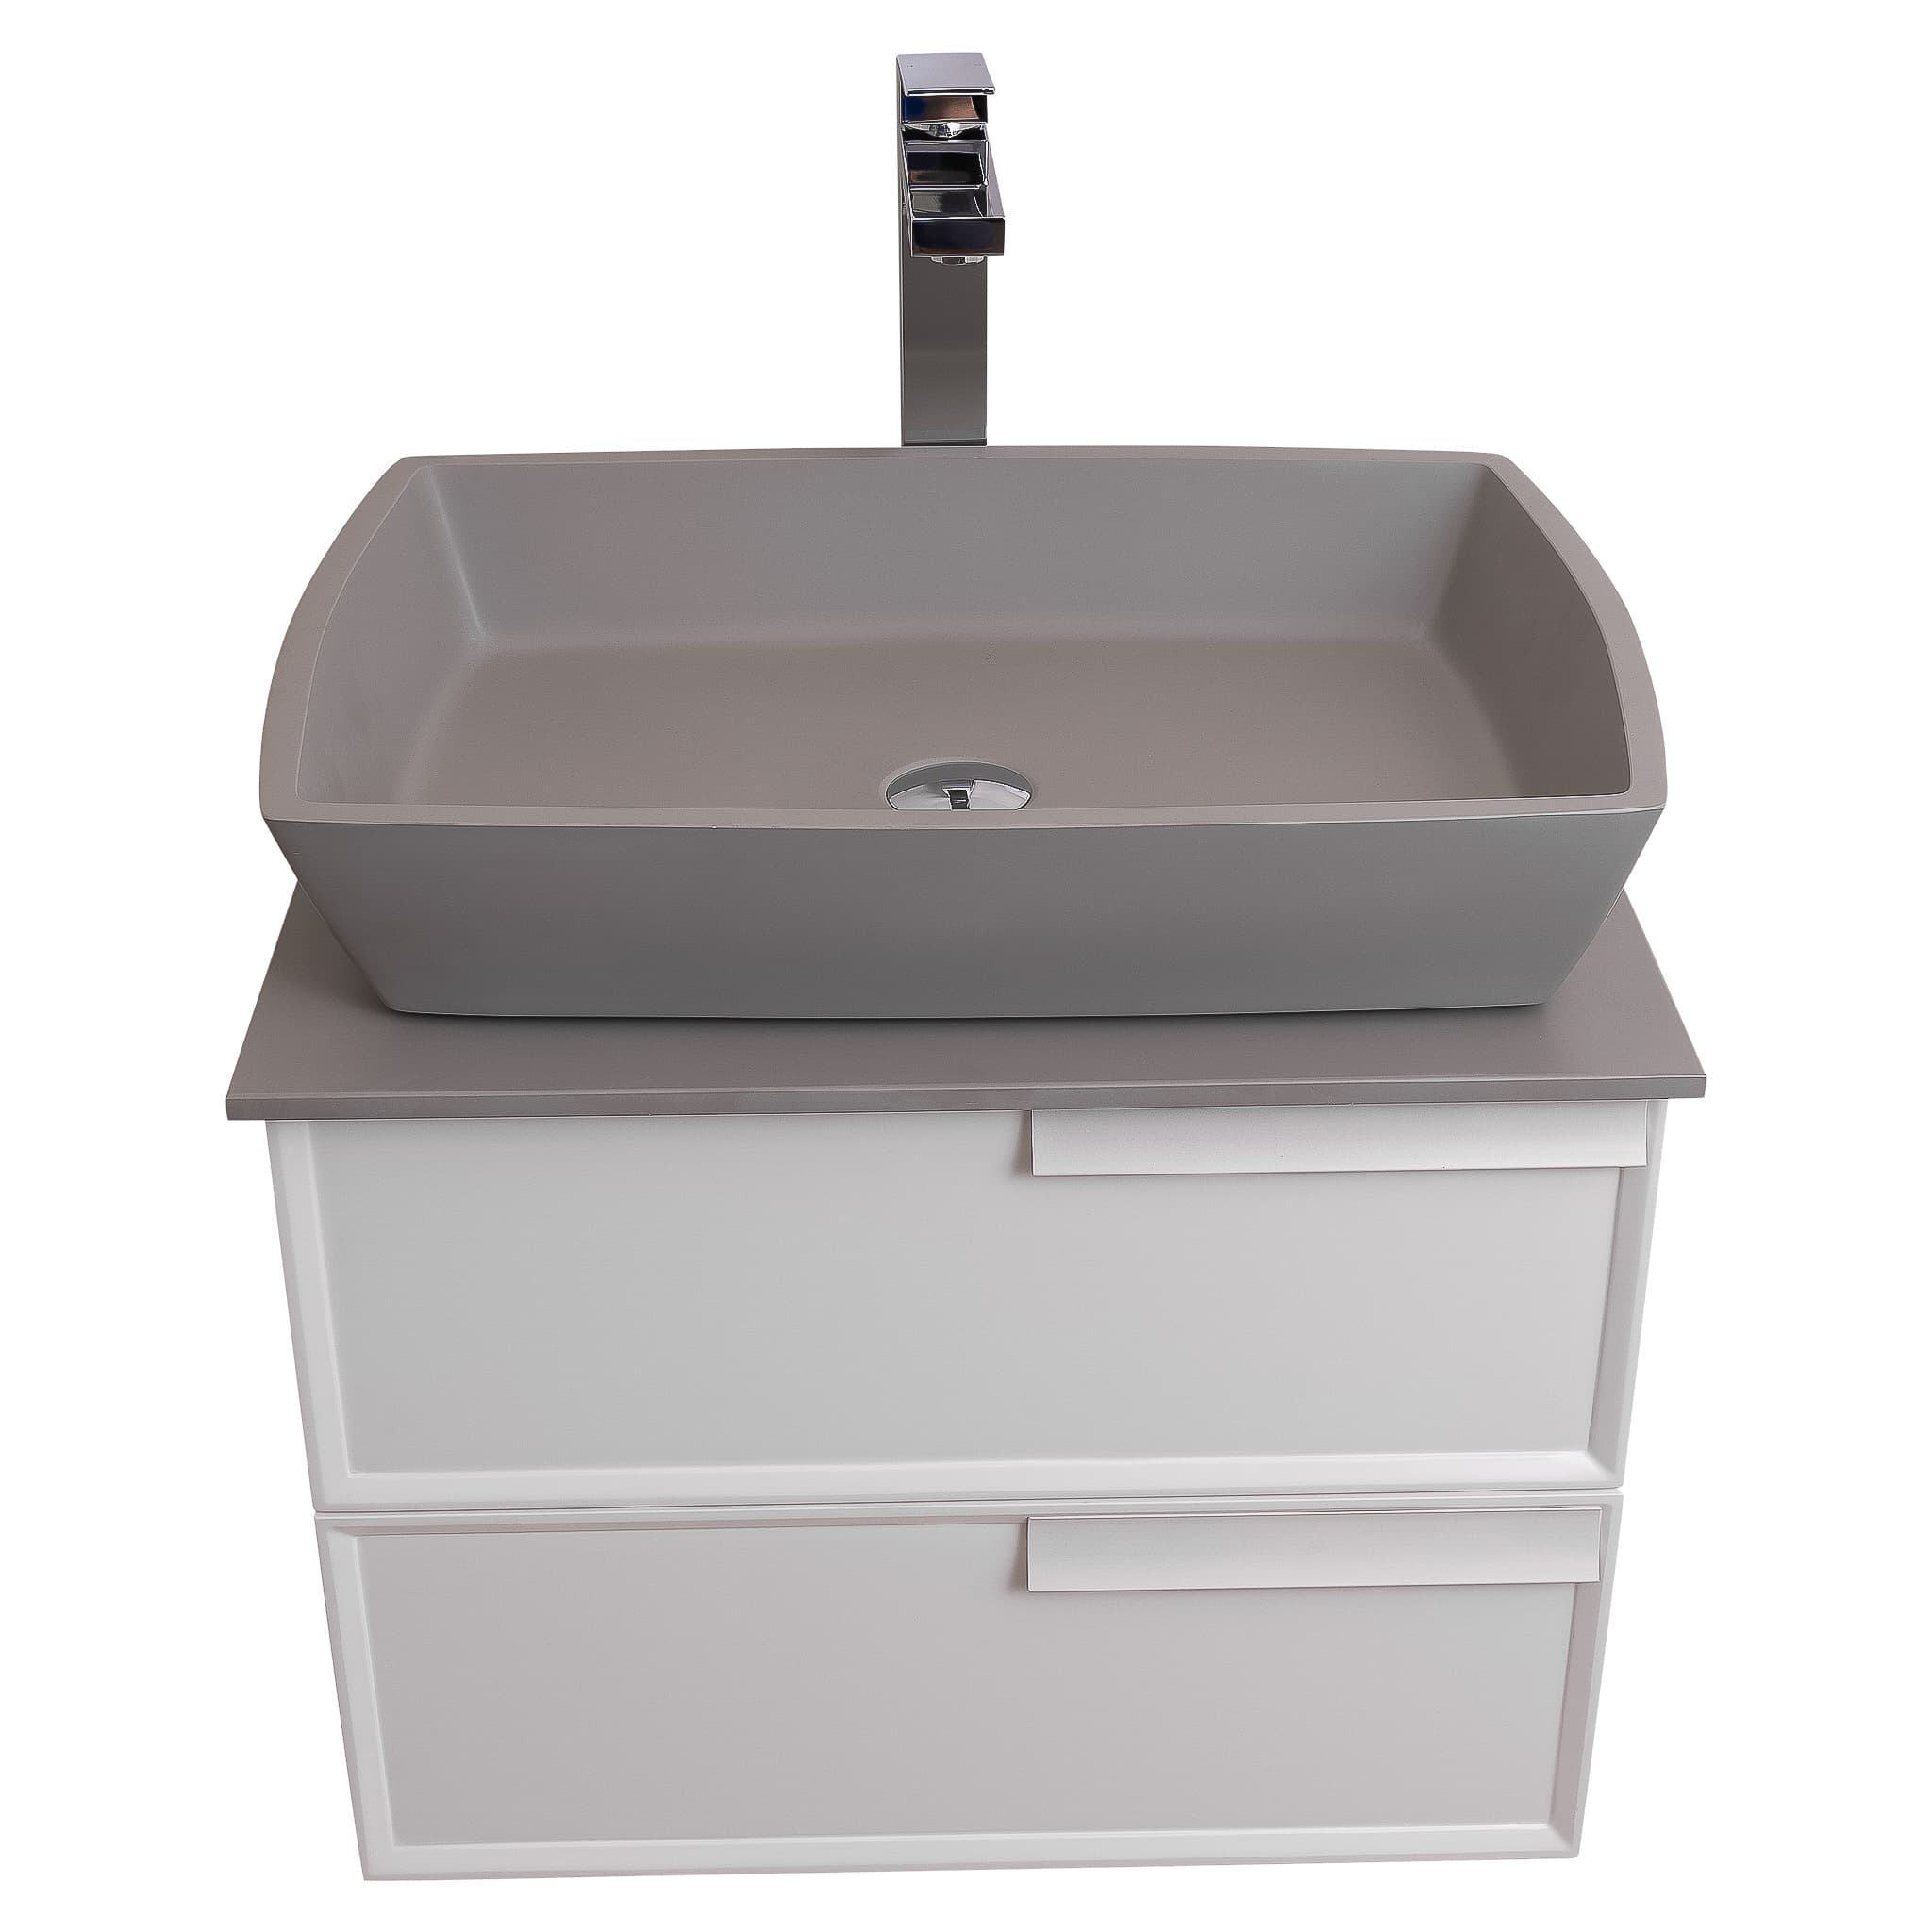 Garda 23.5 Matte White Cabinet, Solid Surface Flat Grey Counter and Square Solid Surface Grey Basin 1316, Wall Mounted Modern Vanity Set